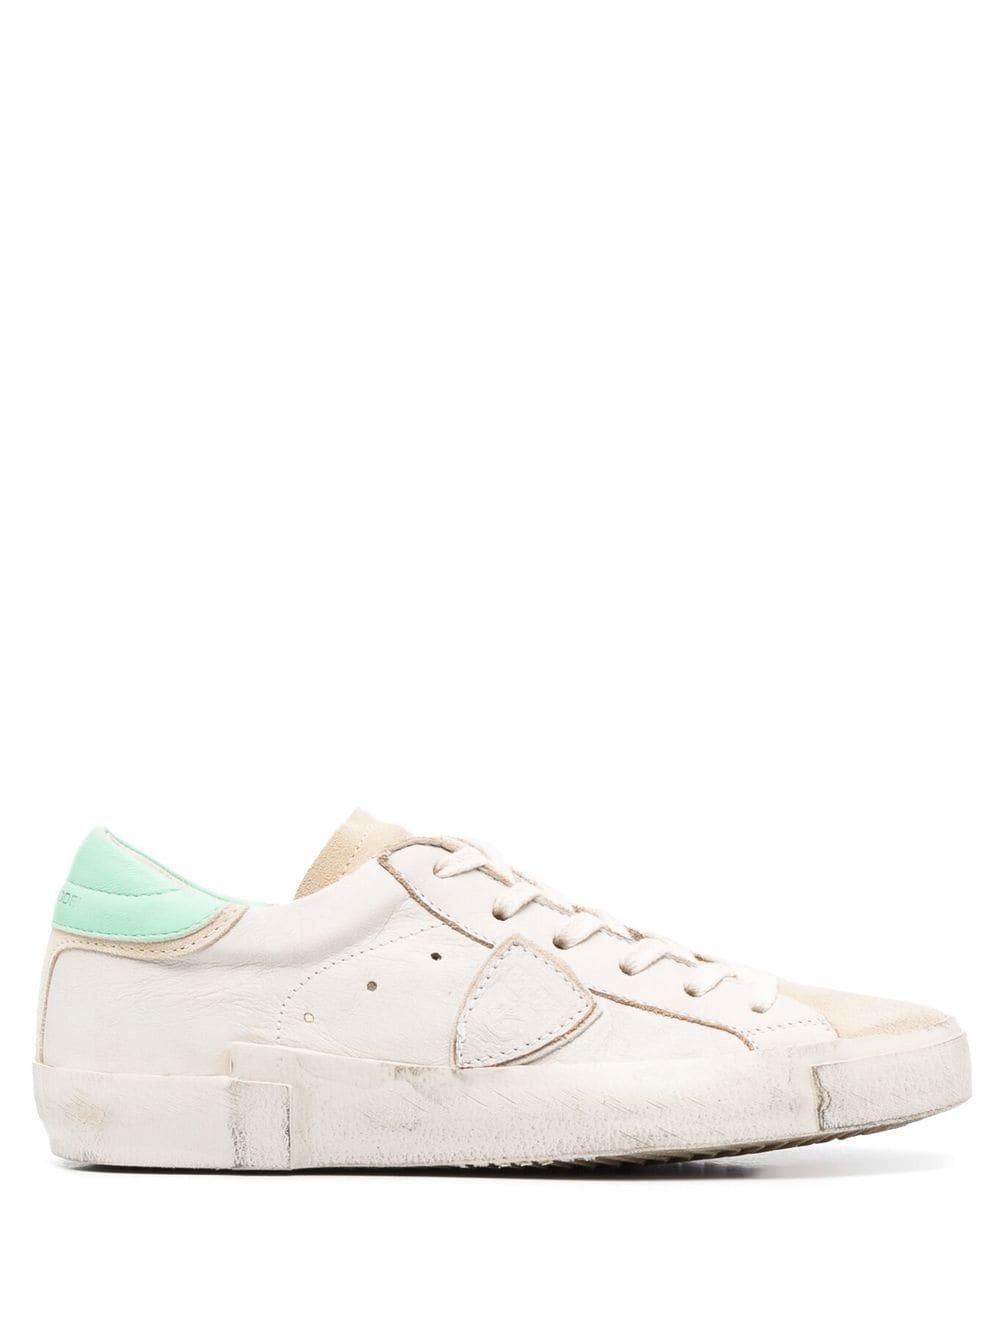 Philippe Model Paris Calf-leather Distressed-finish Sneakers in White | Lyst